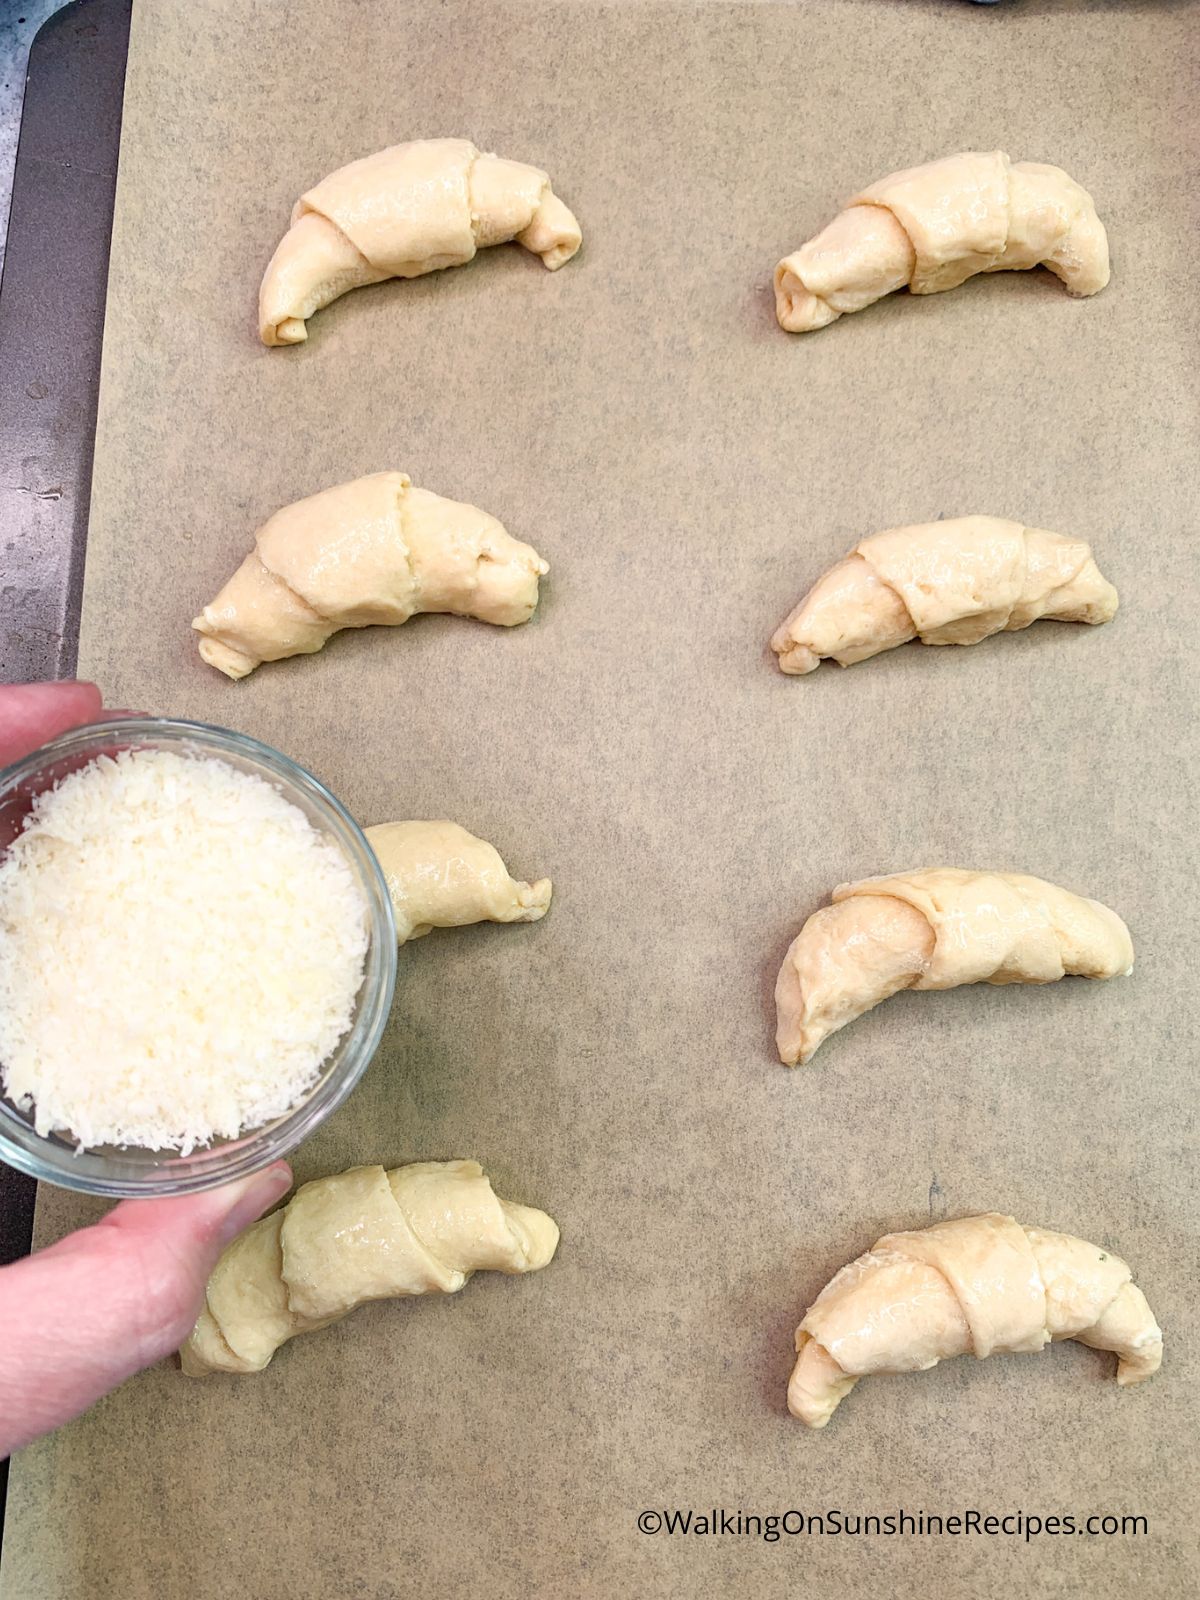 Sprinkle Parmesan chee on top of garlic butter crescent rolls.